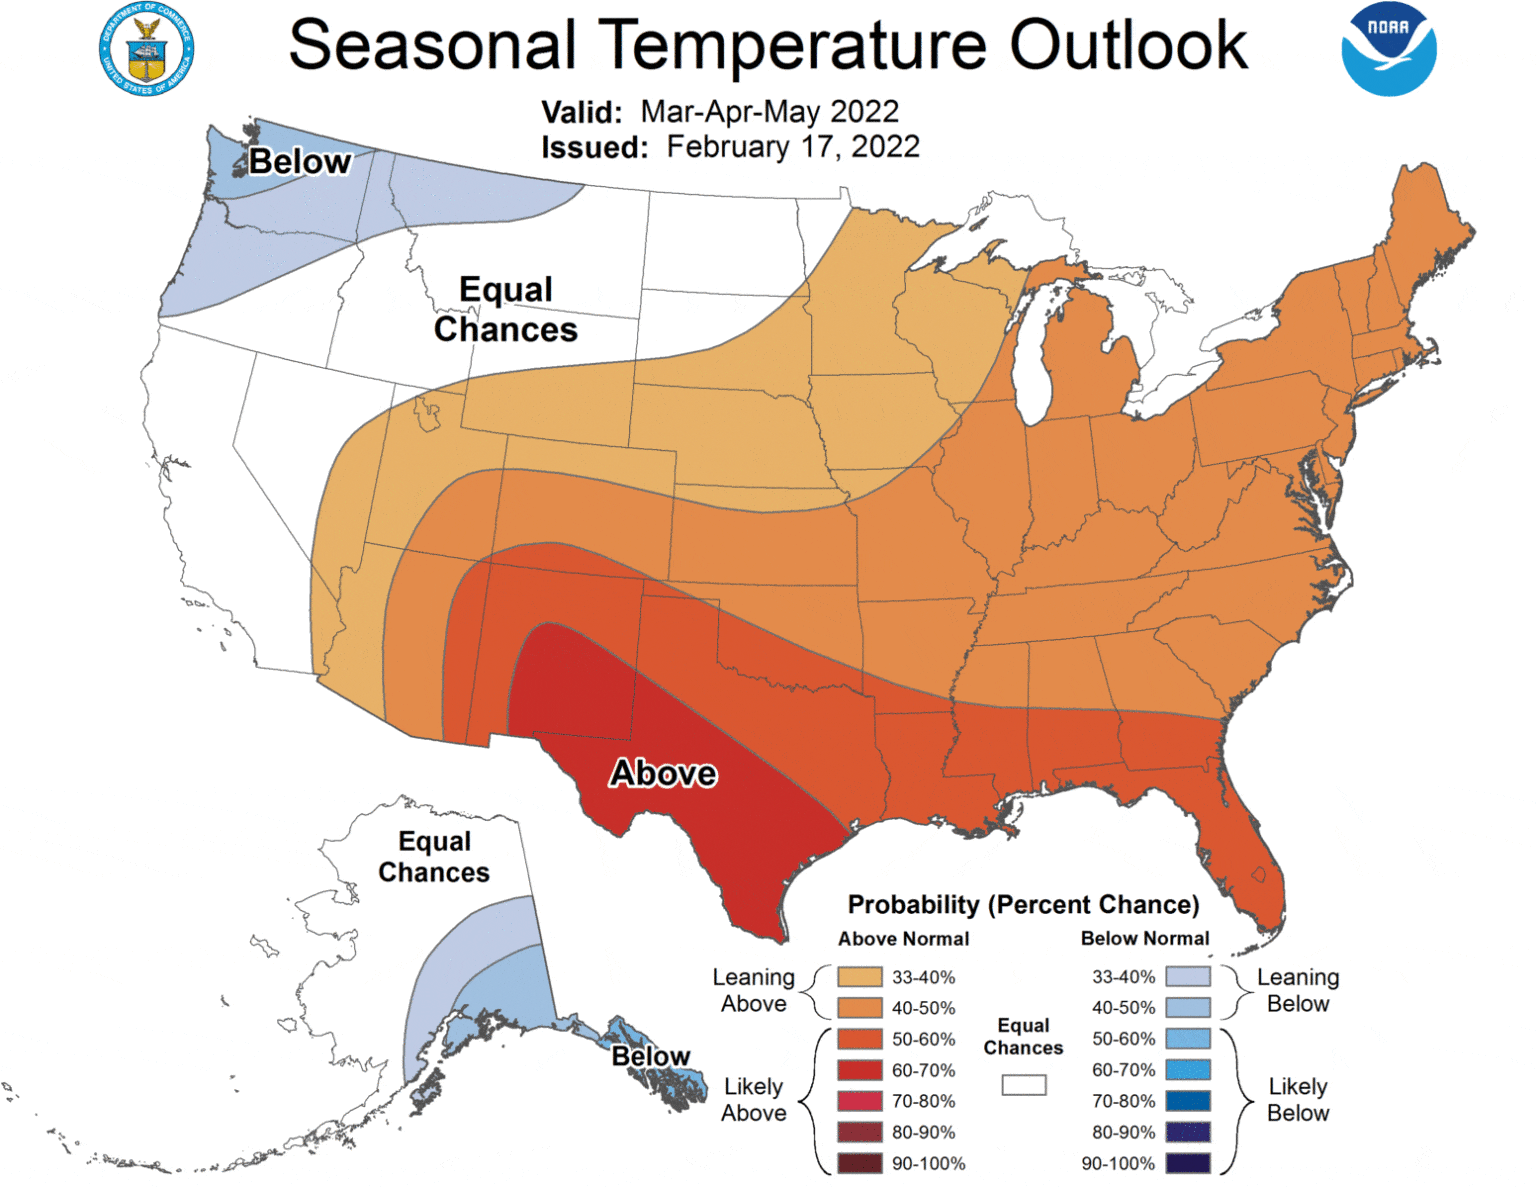 Spring weather in Georgia is expected to be warmer than usual